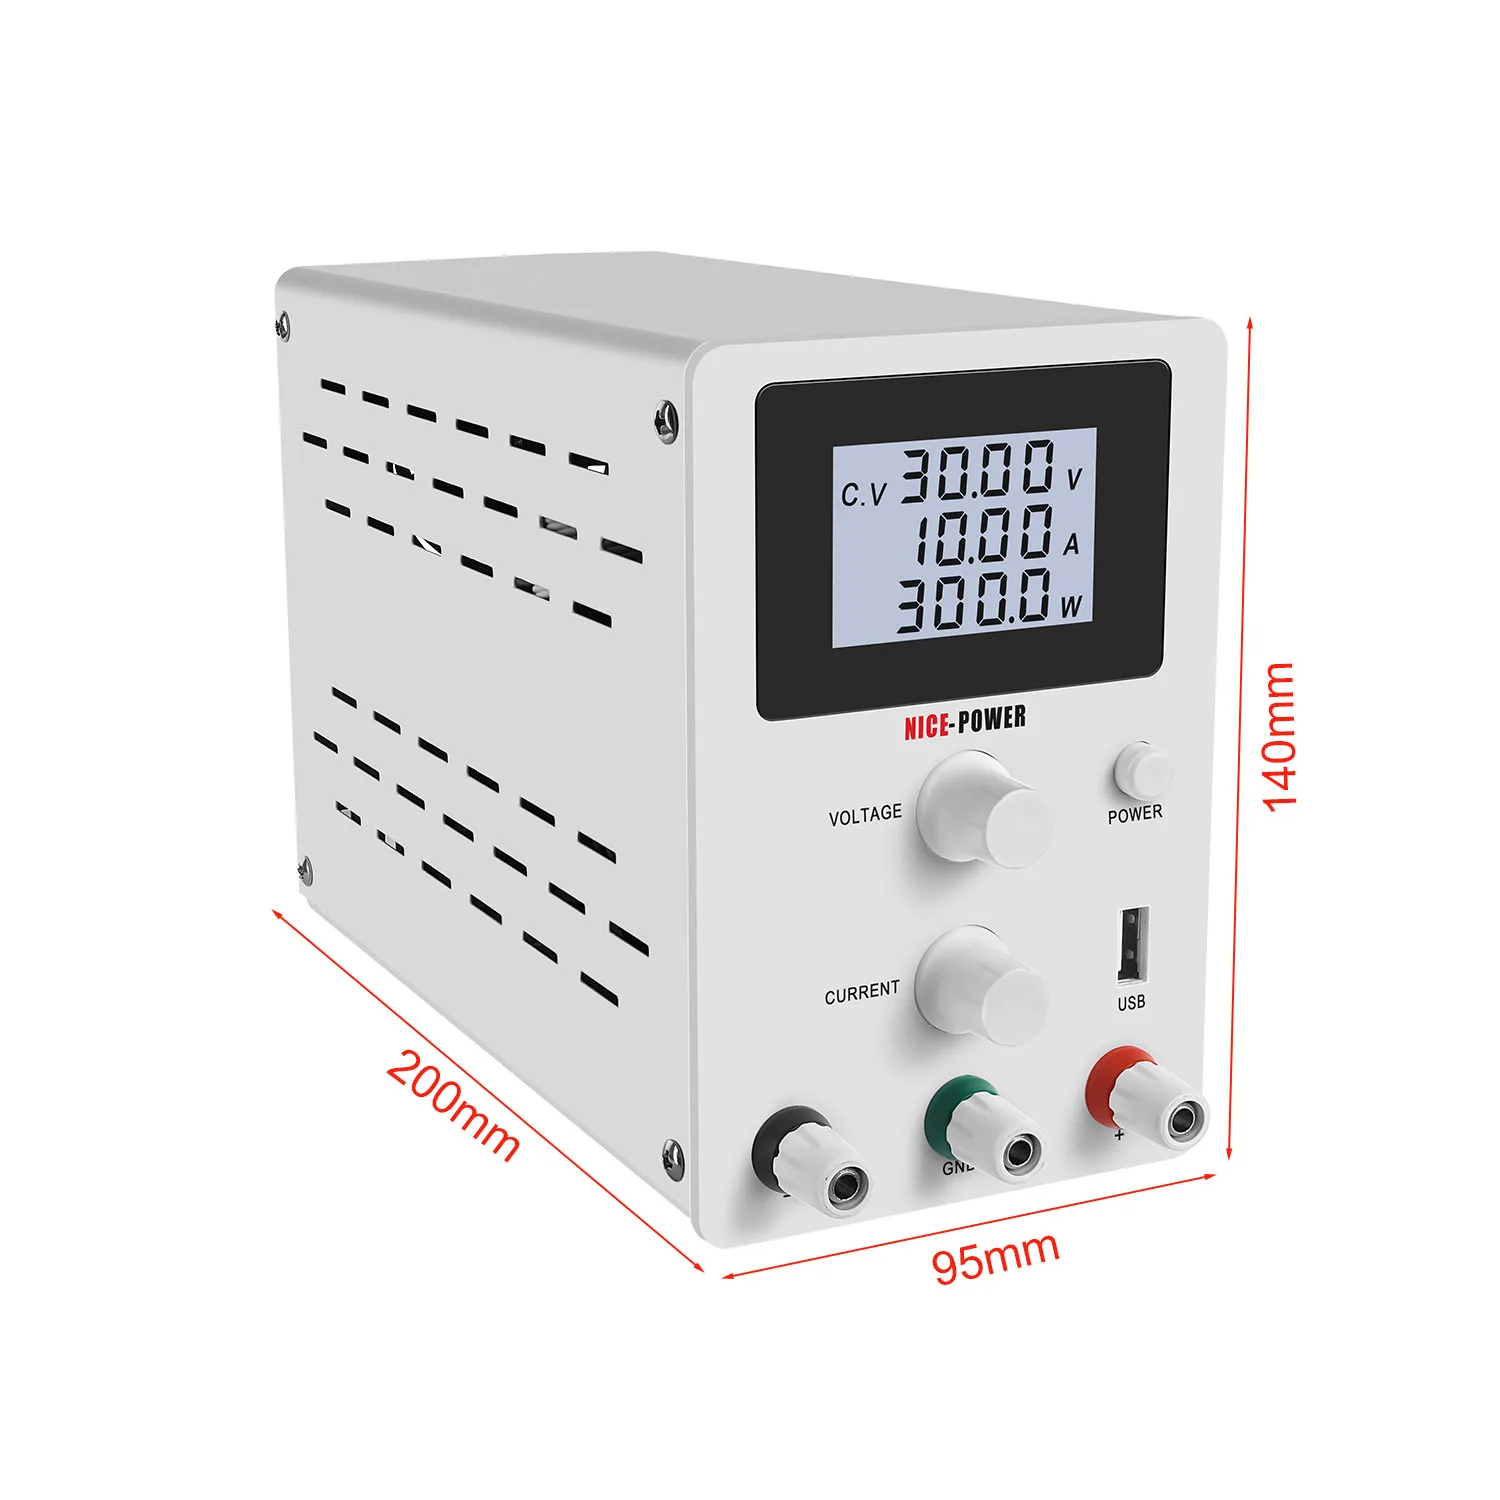 Details about   NEW R.S.R ELECTRONICS REGULATED DC POWER SUPPLY MODEL 3010 